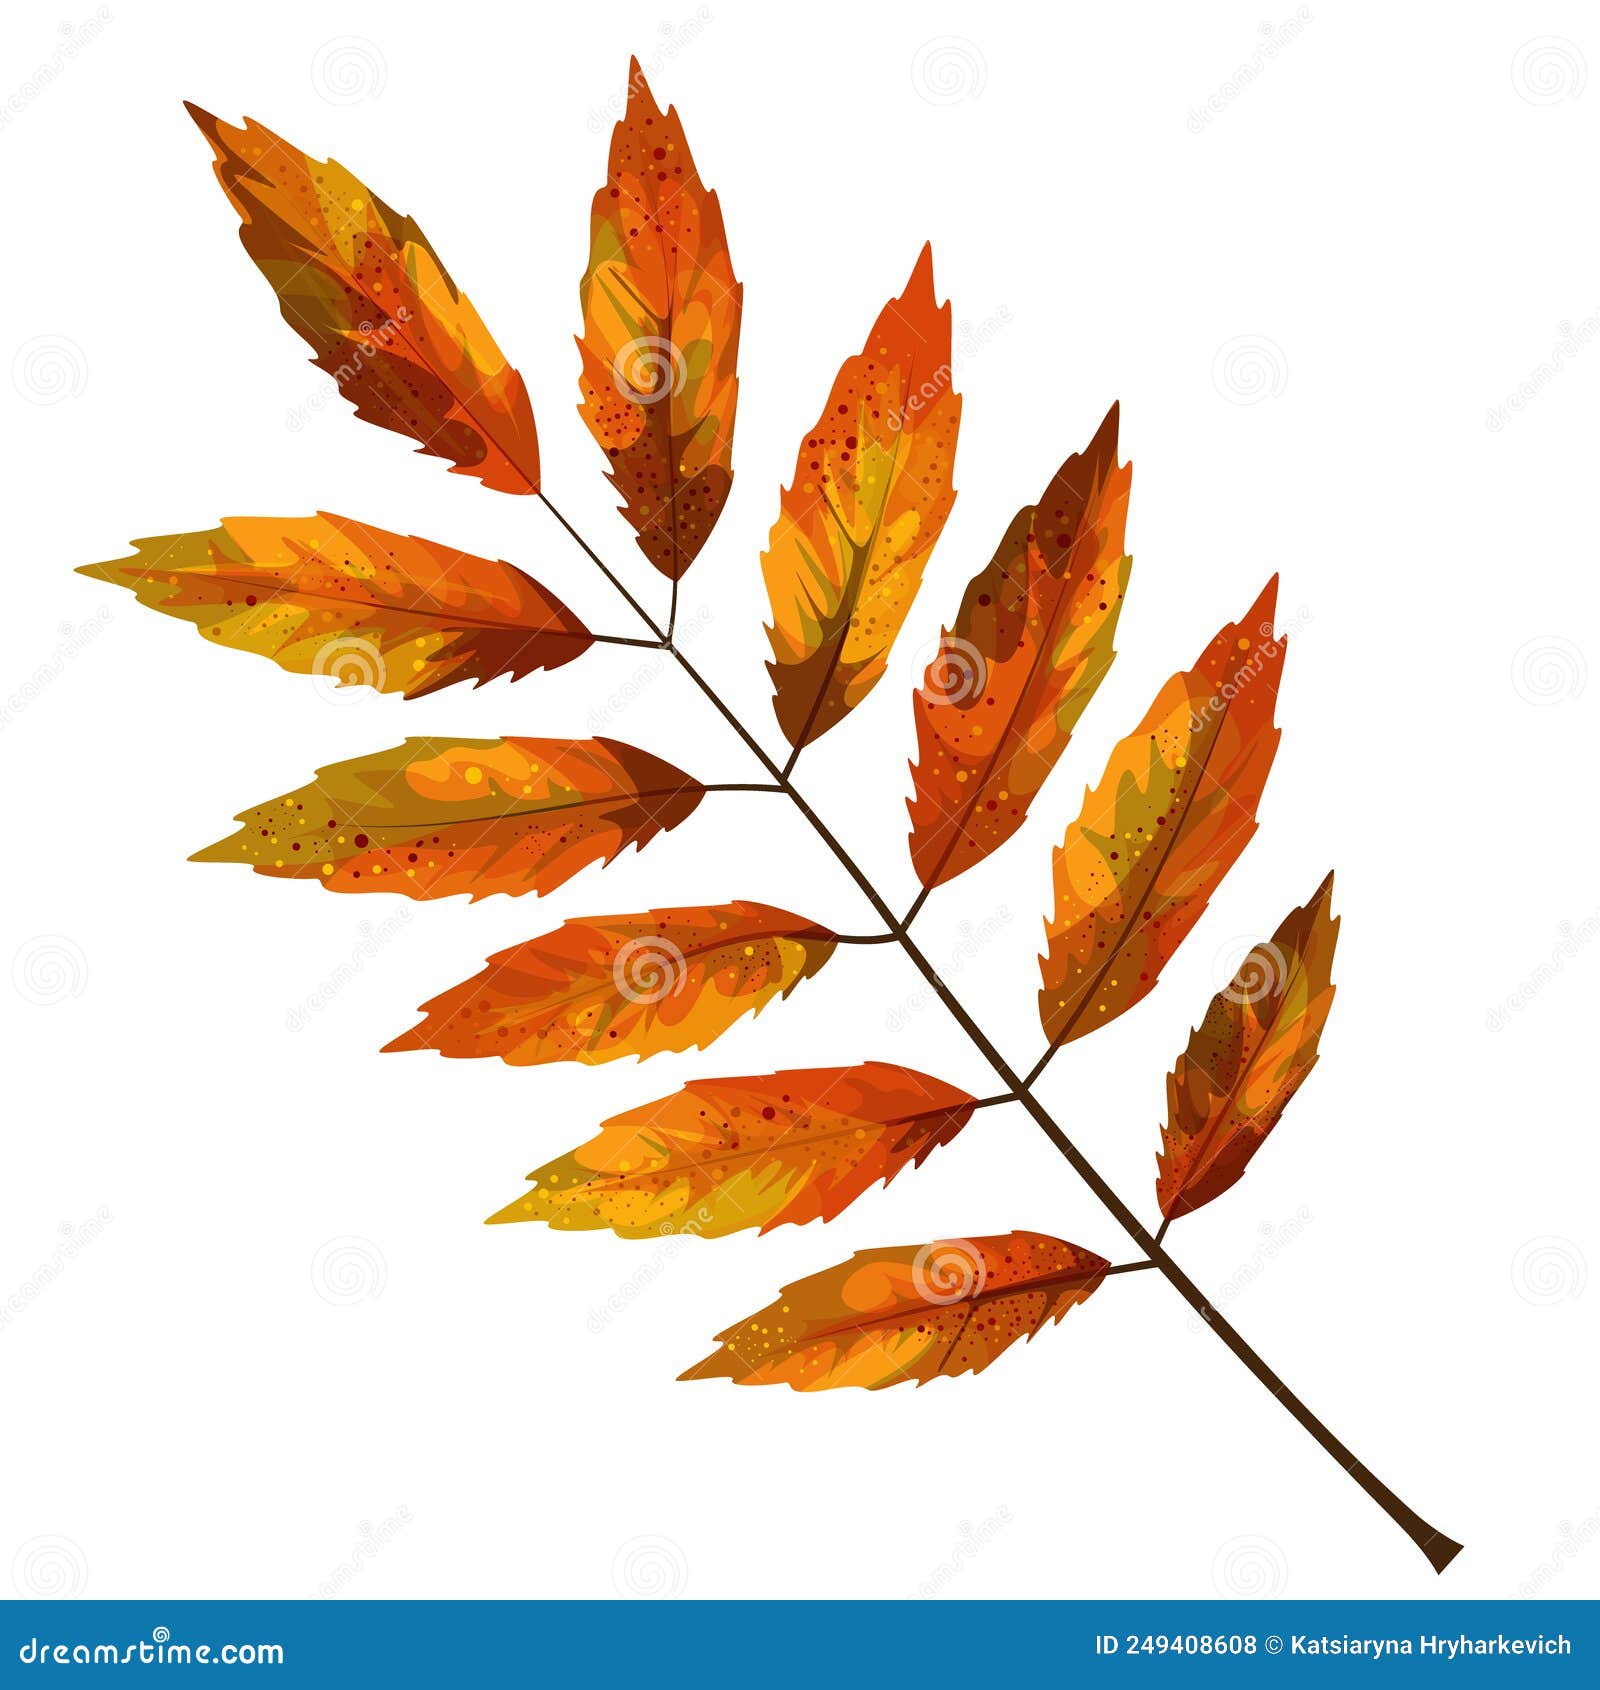 Vector Realism of a Stylized Autumn Leaf on a White BackgroundCartoon ...